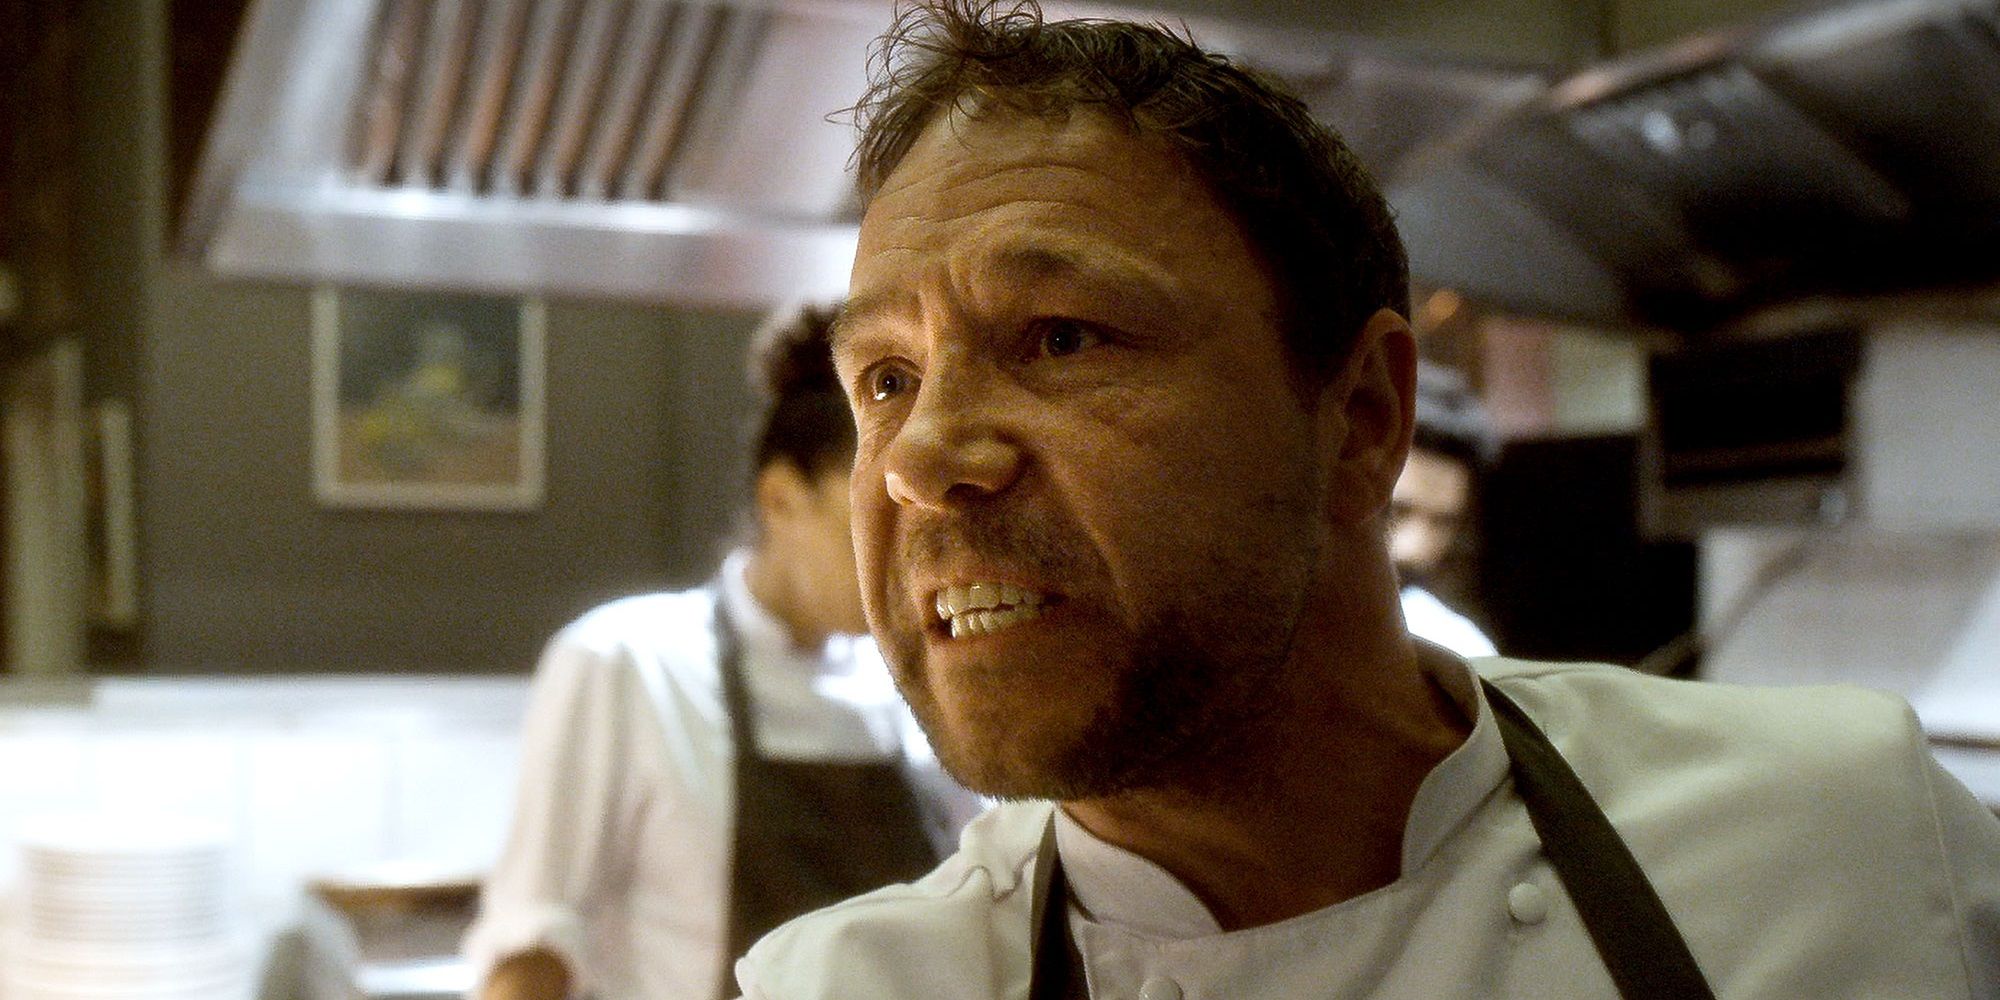 Stephen Graham as a chef yelling in Boiling Point.